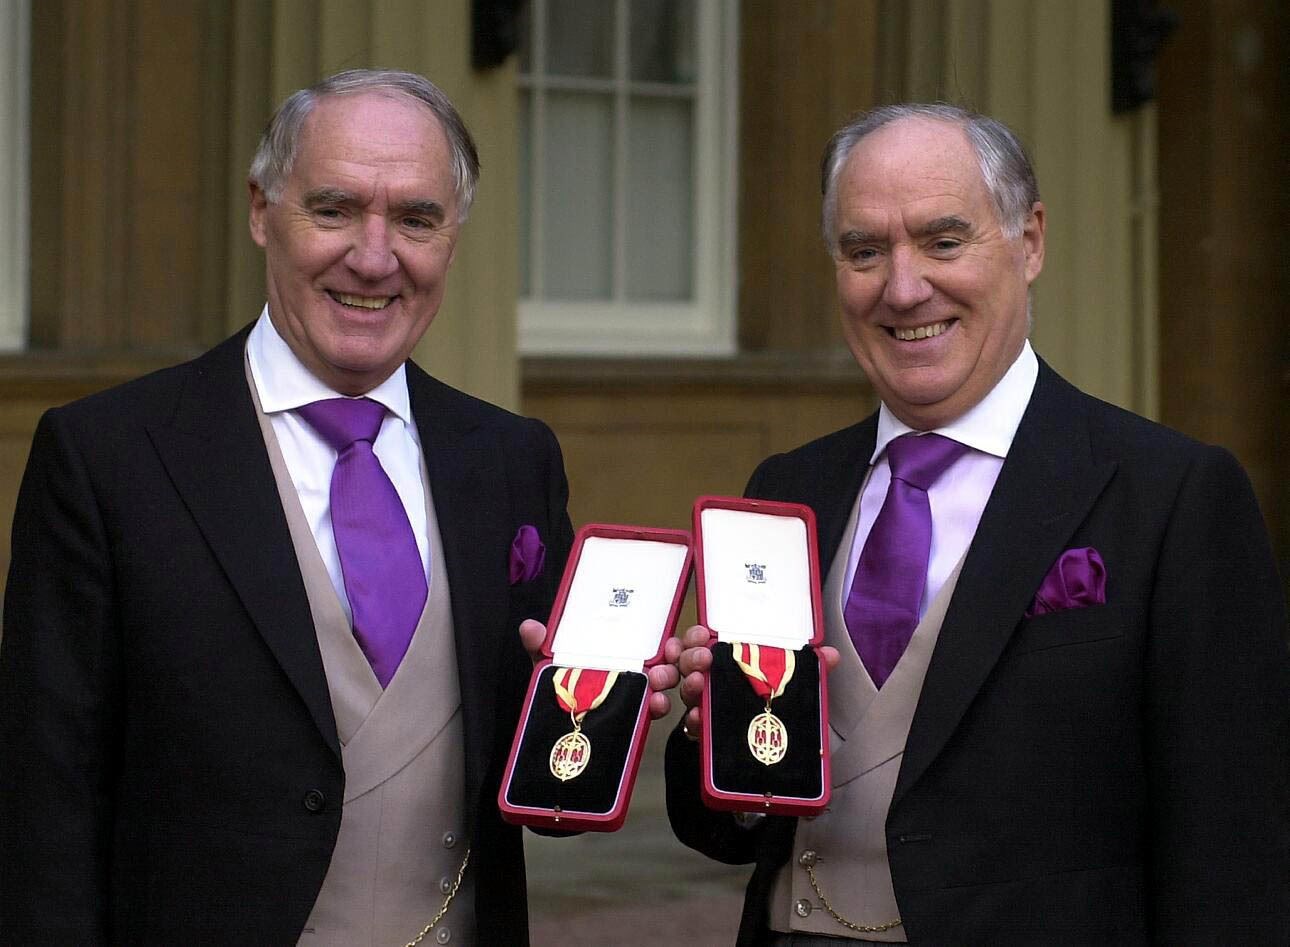 Sir David Barclay and his twin brother Sir Frederick after receiving their knighthoods from the Queen at Buckingham Palace (Michael Stephens/PA)